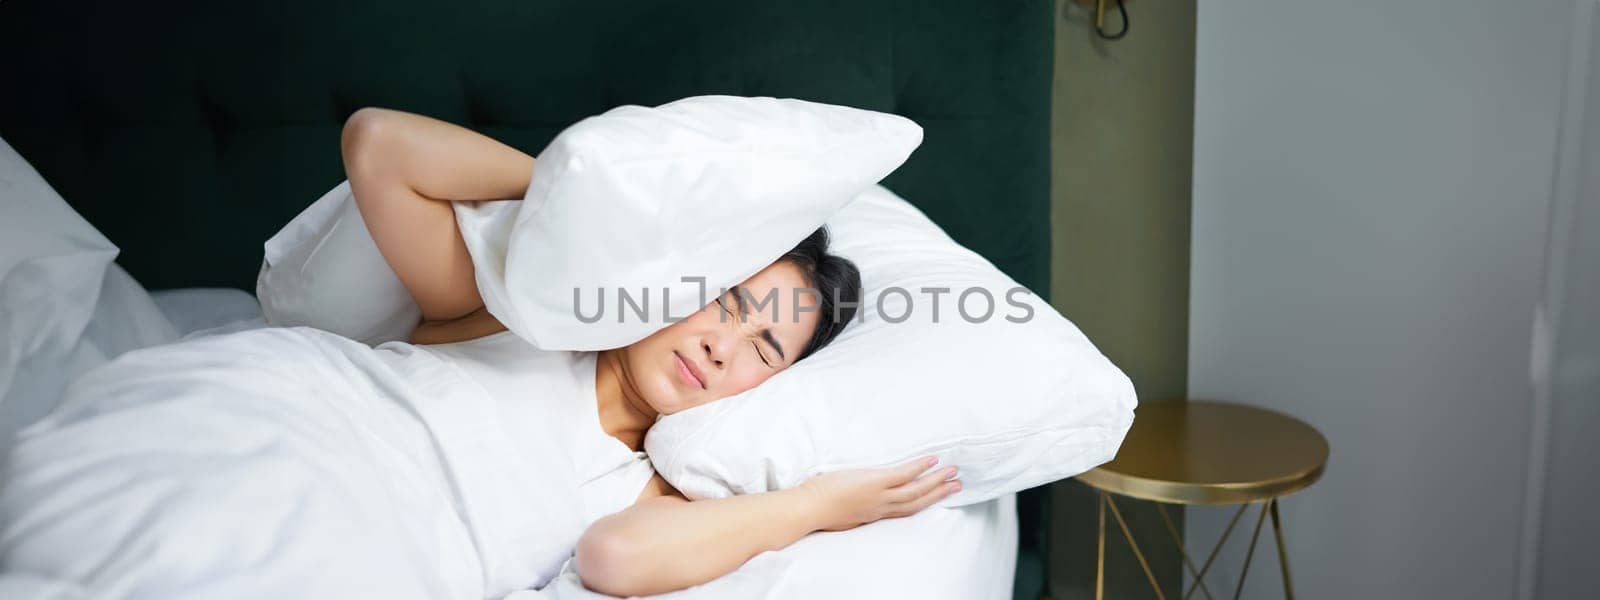 Insomnia. Asian girl shuts her ears with pillow as partner snoring. Woman lying in bed, bothered by noise at night, cannot sleep.